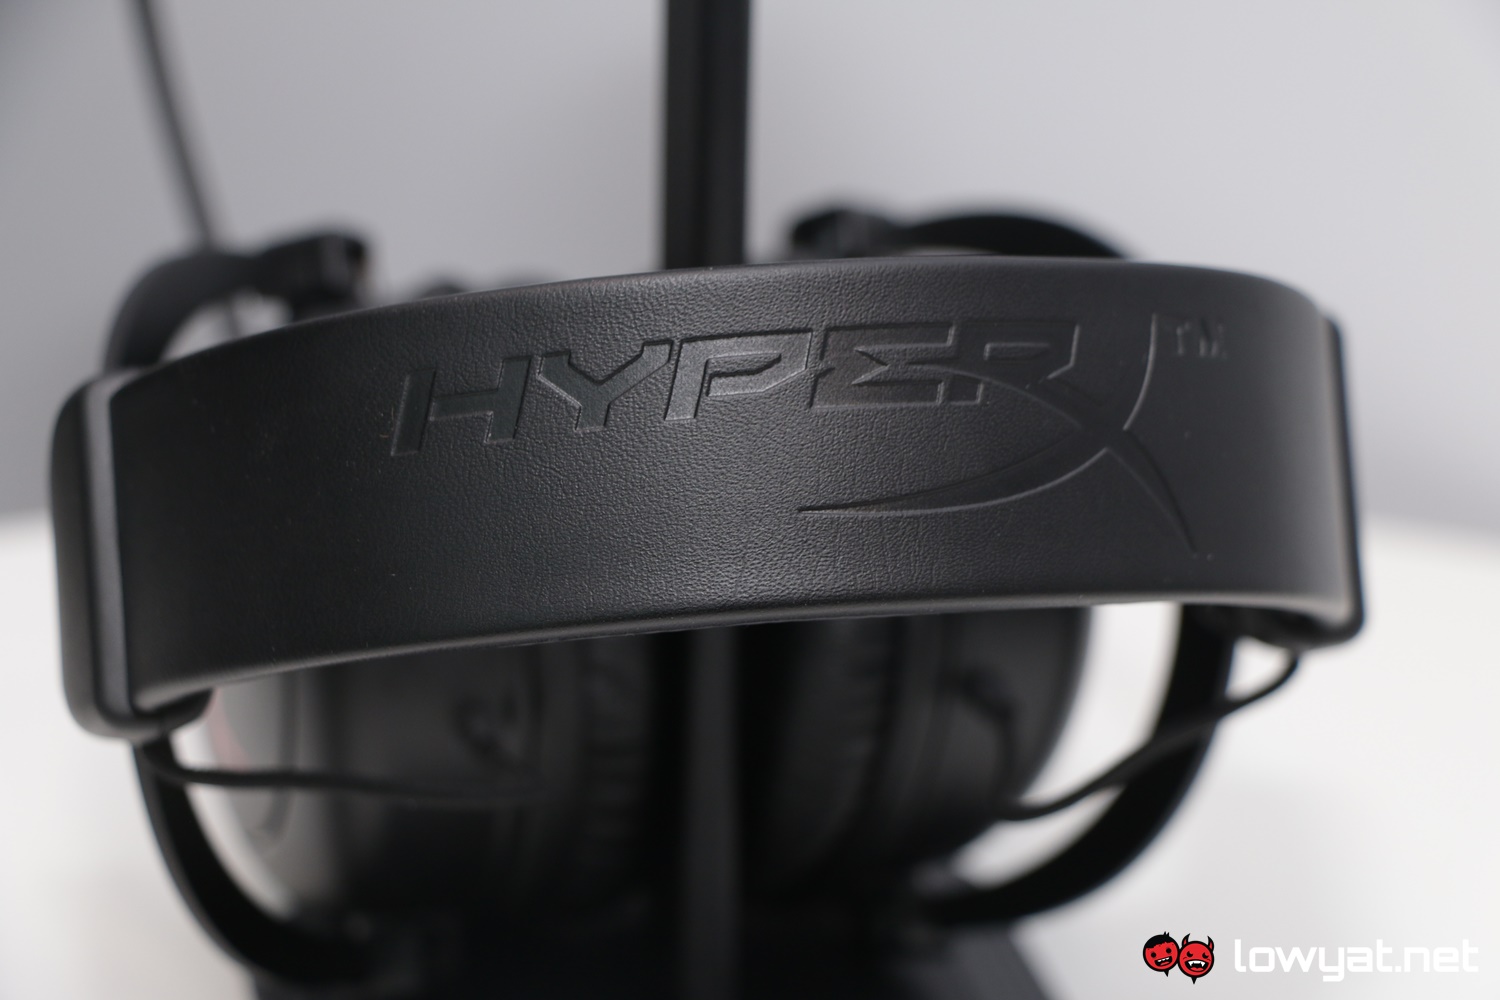 HyperX Cloud Core Wireless DTS Over Ear Gaming Headset with Mic (Black)